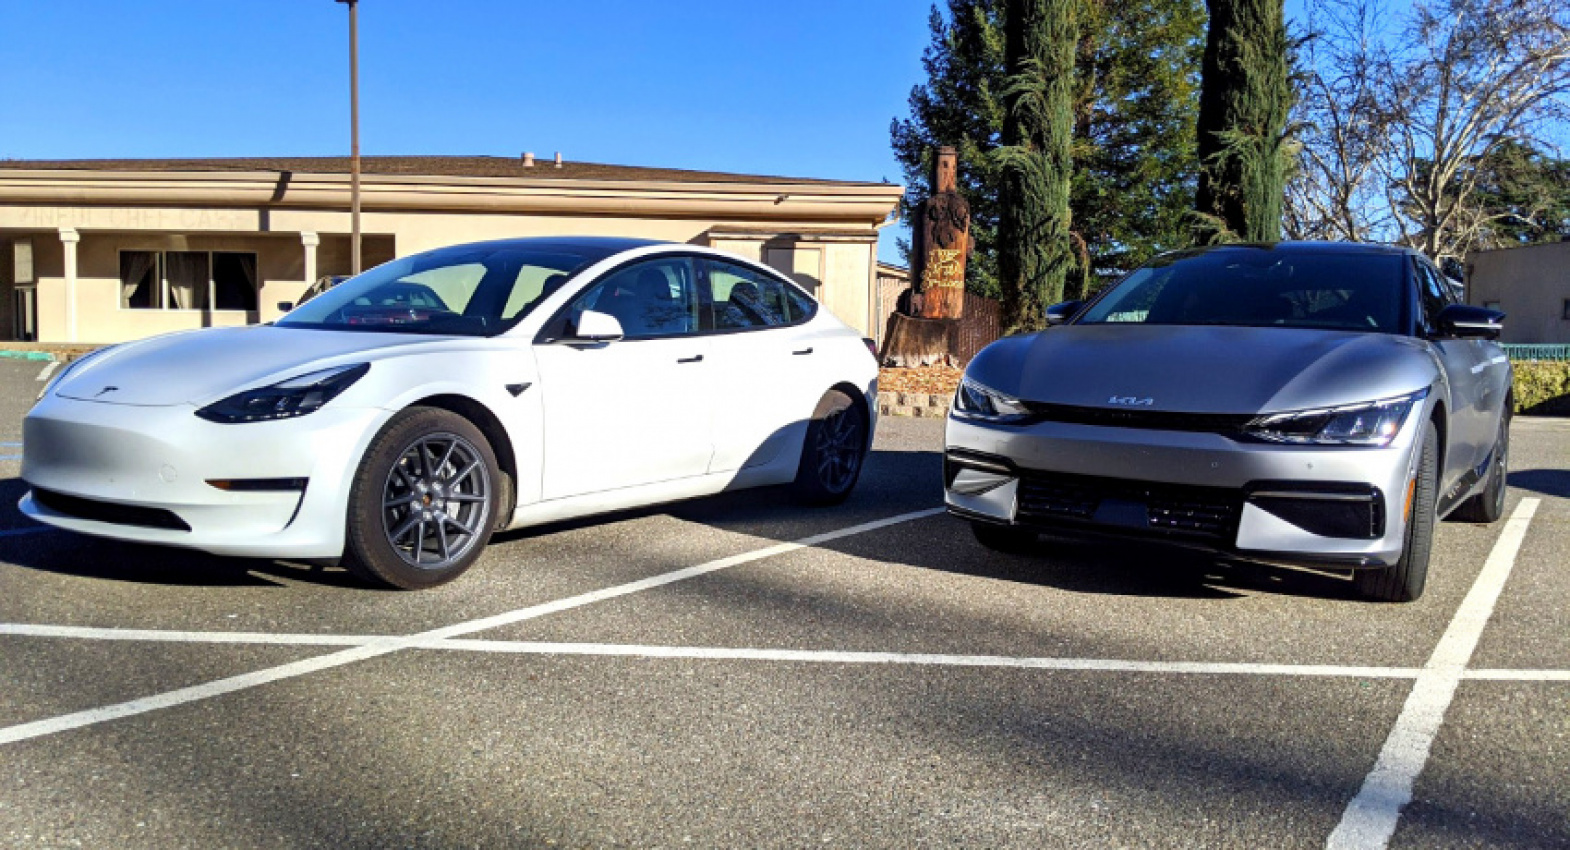 autos, cars, kia, news, tesla, android, comparison, electric vehicles, feature, galleries, kia ev6, tesla model 3, tesla model y, android, check out the new kia ev6 next to a tesla model 3 and see how they compare